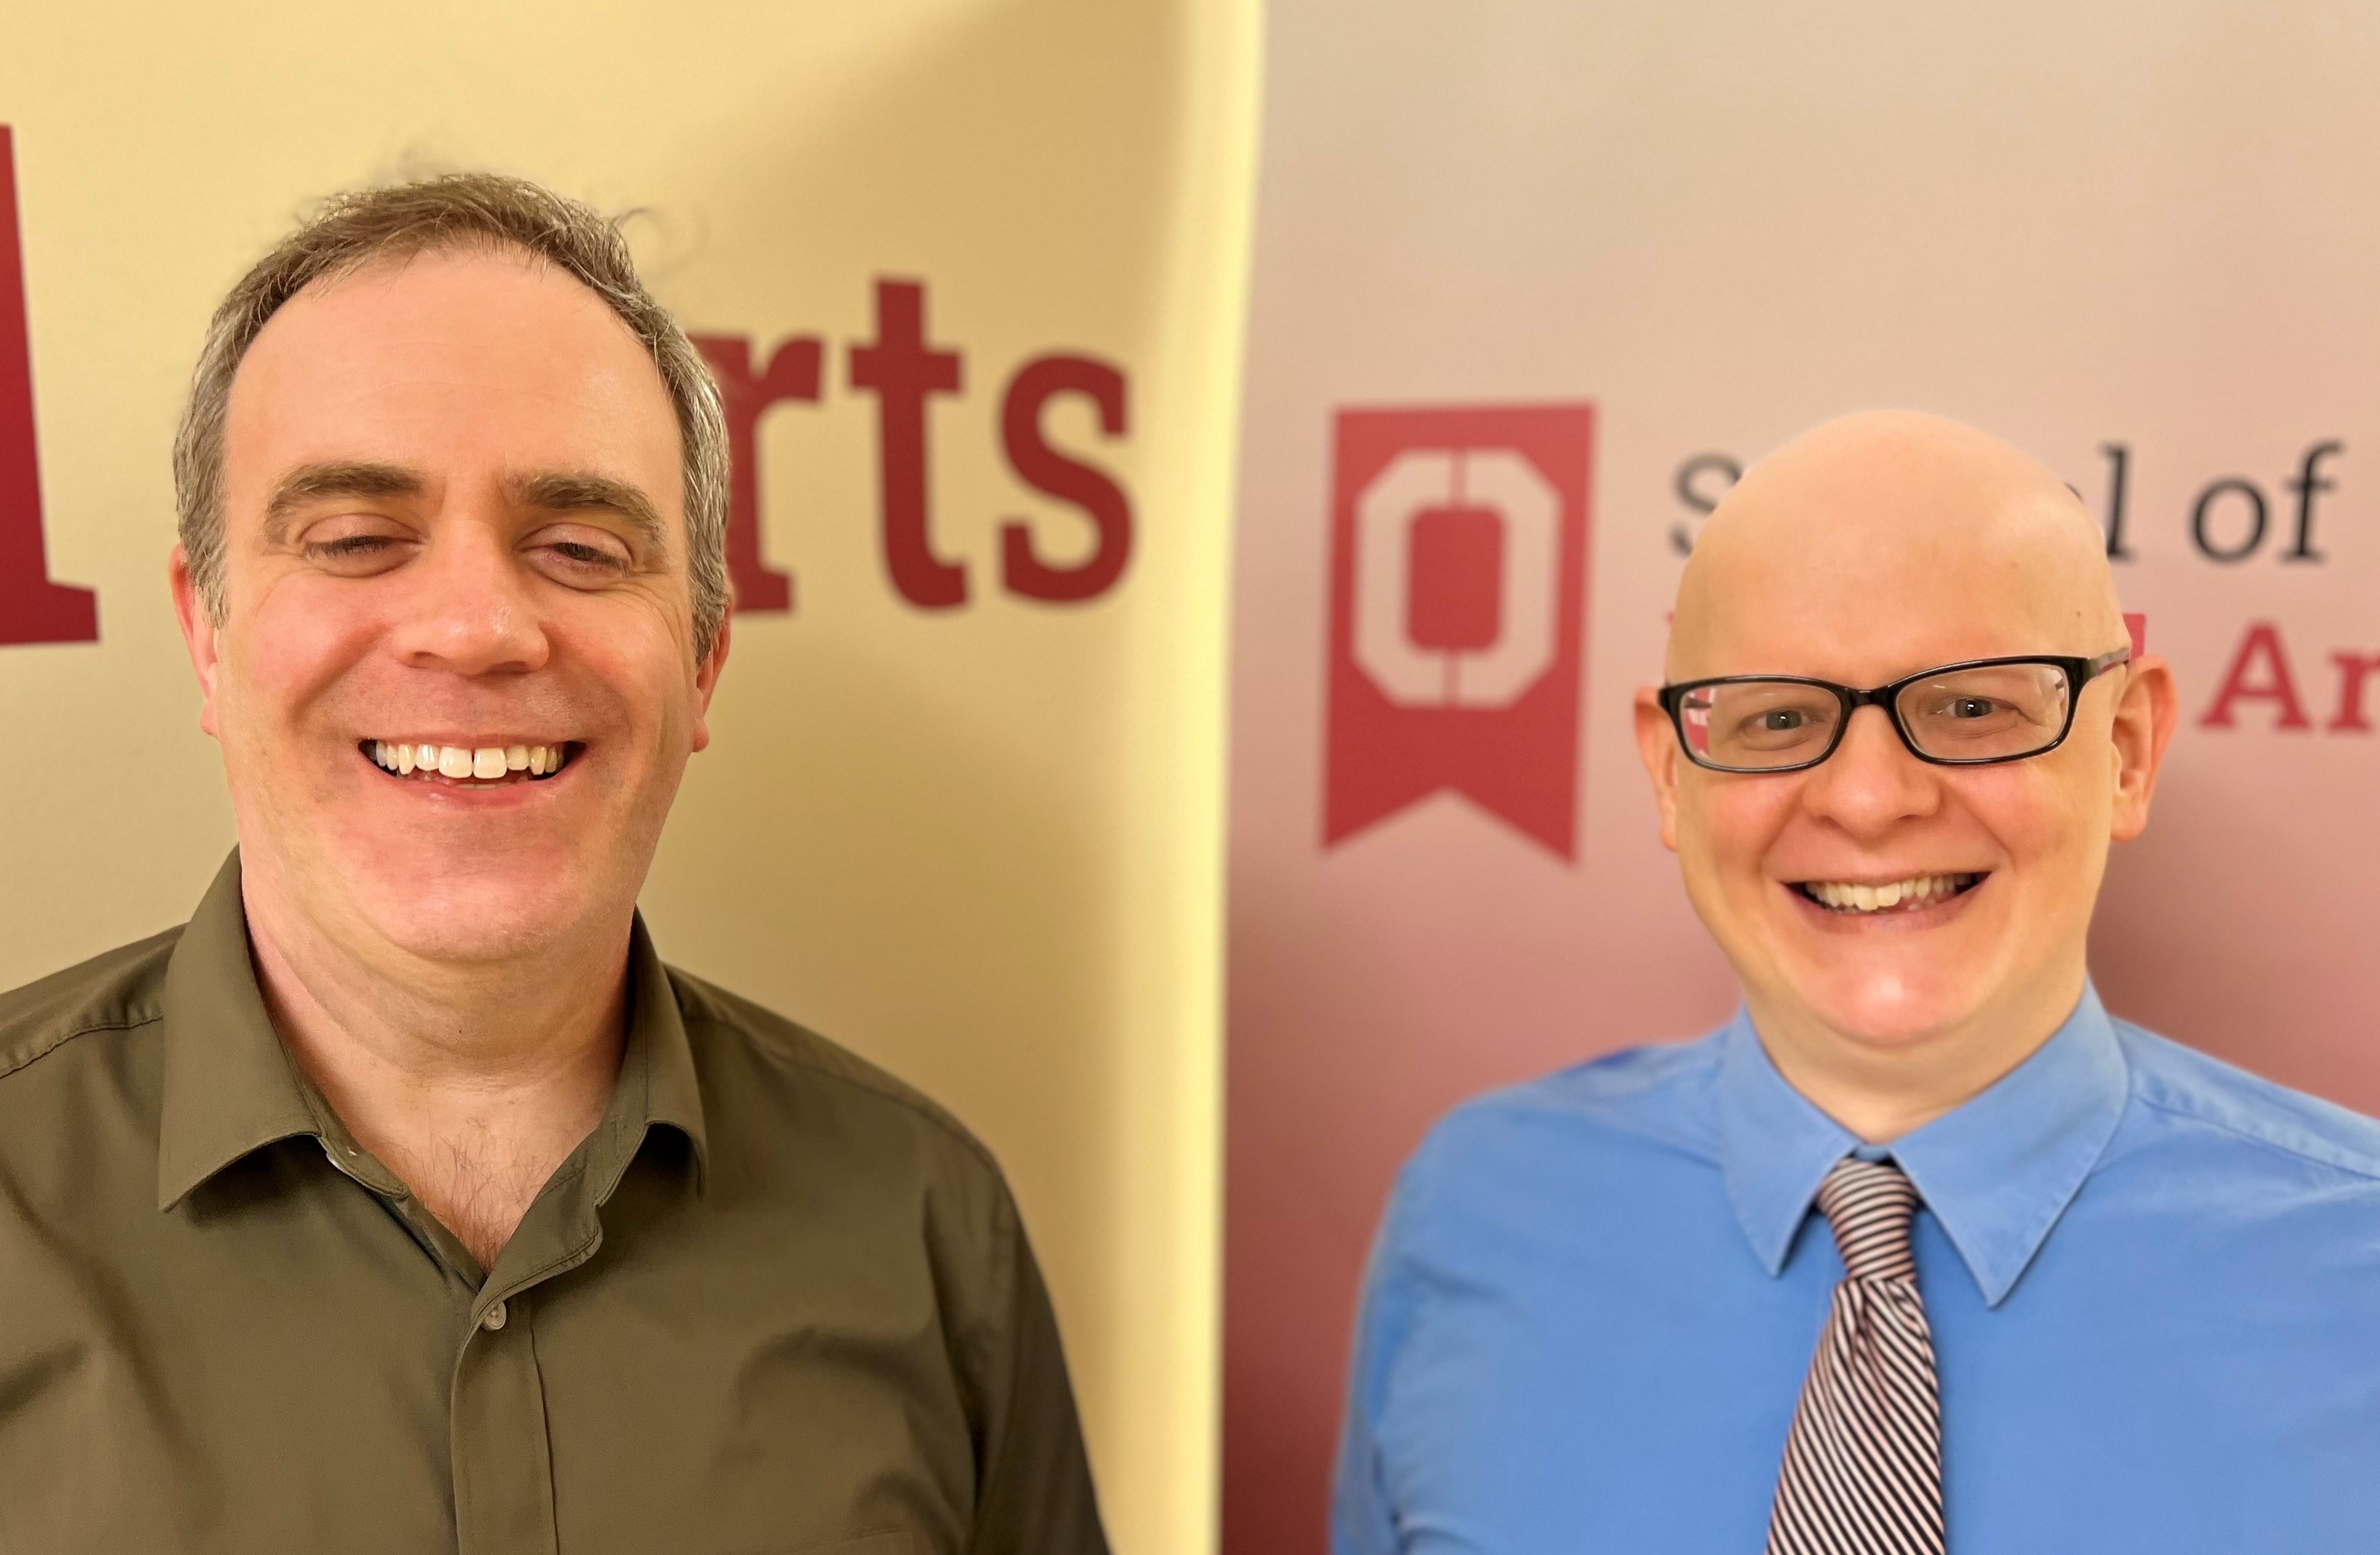 Professors Pat Kenny (left) and Shawn Wiemann (right) are Co-Principal Investigators in the Cornerstone: Learning for Living project, an initiative co-funded by the National Endowment for the Humanities and the Teagle Foundation. Their project is titled “Enduring Questions and Liberal Arts Pathways at OCC.”